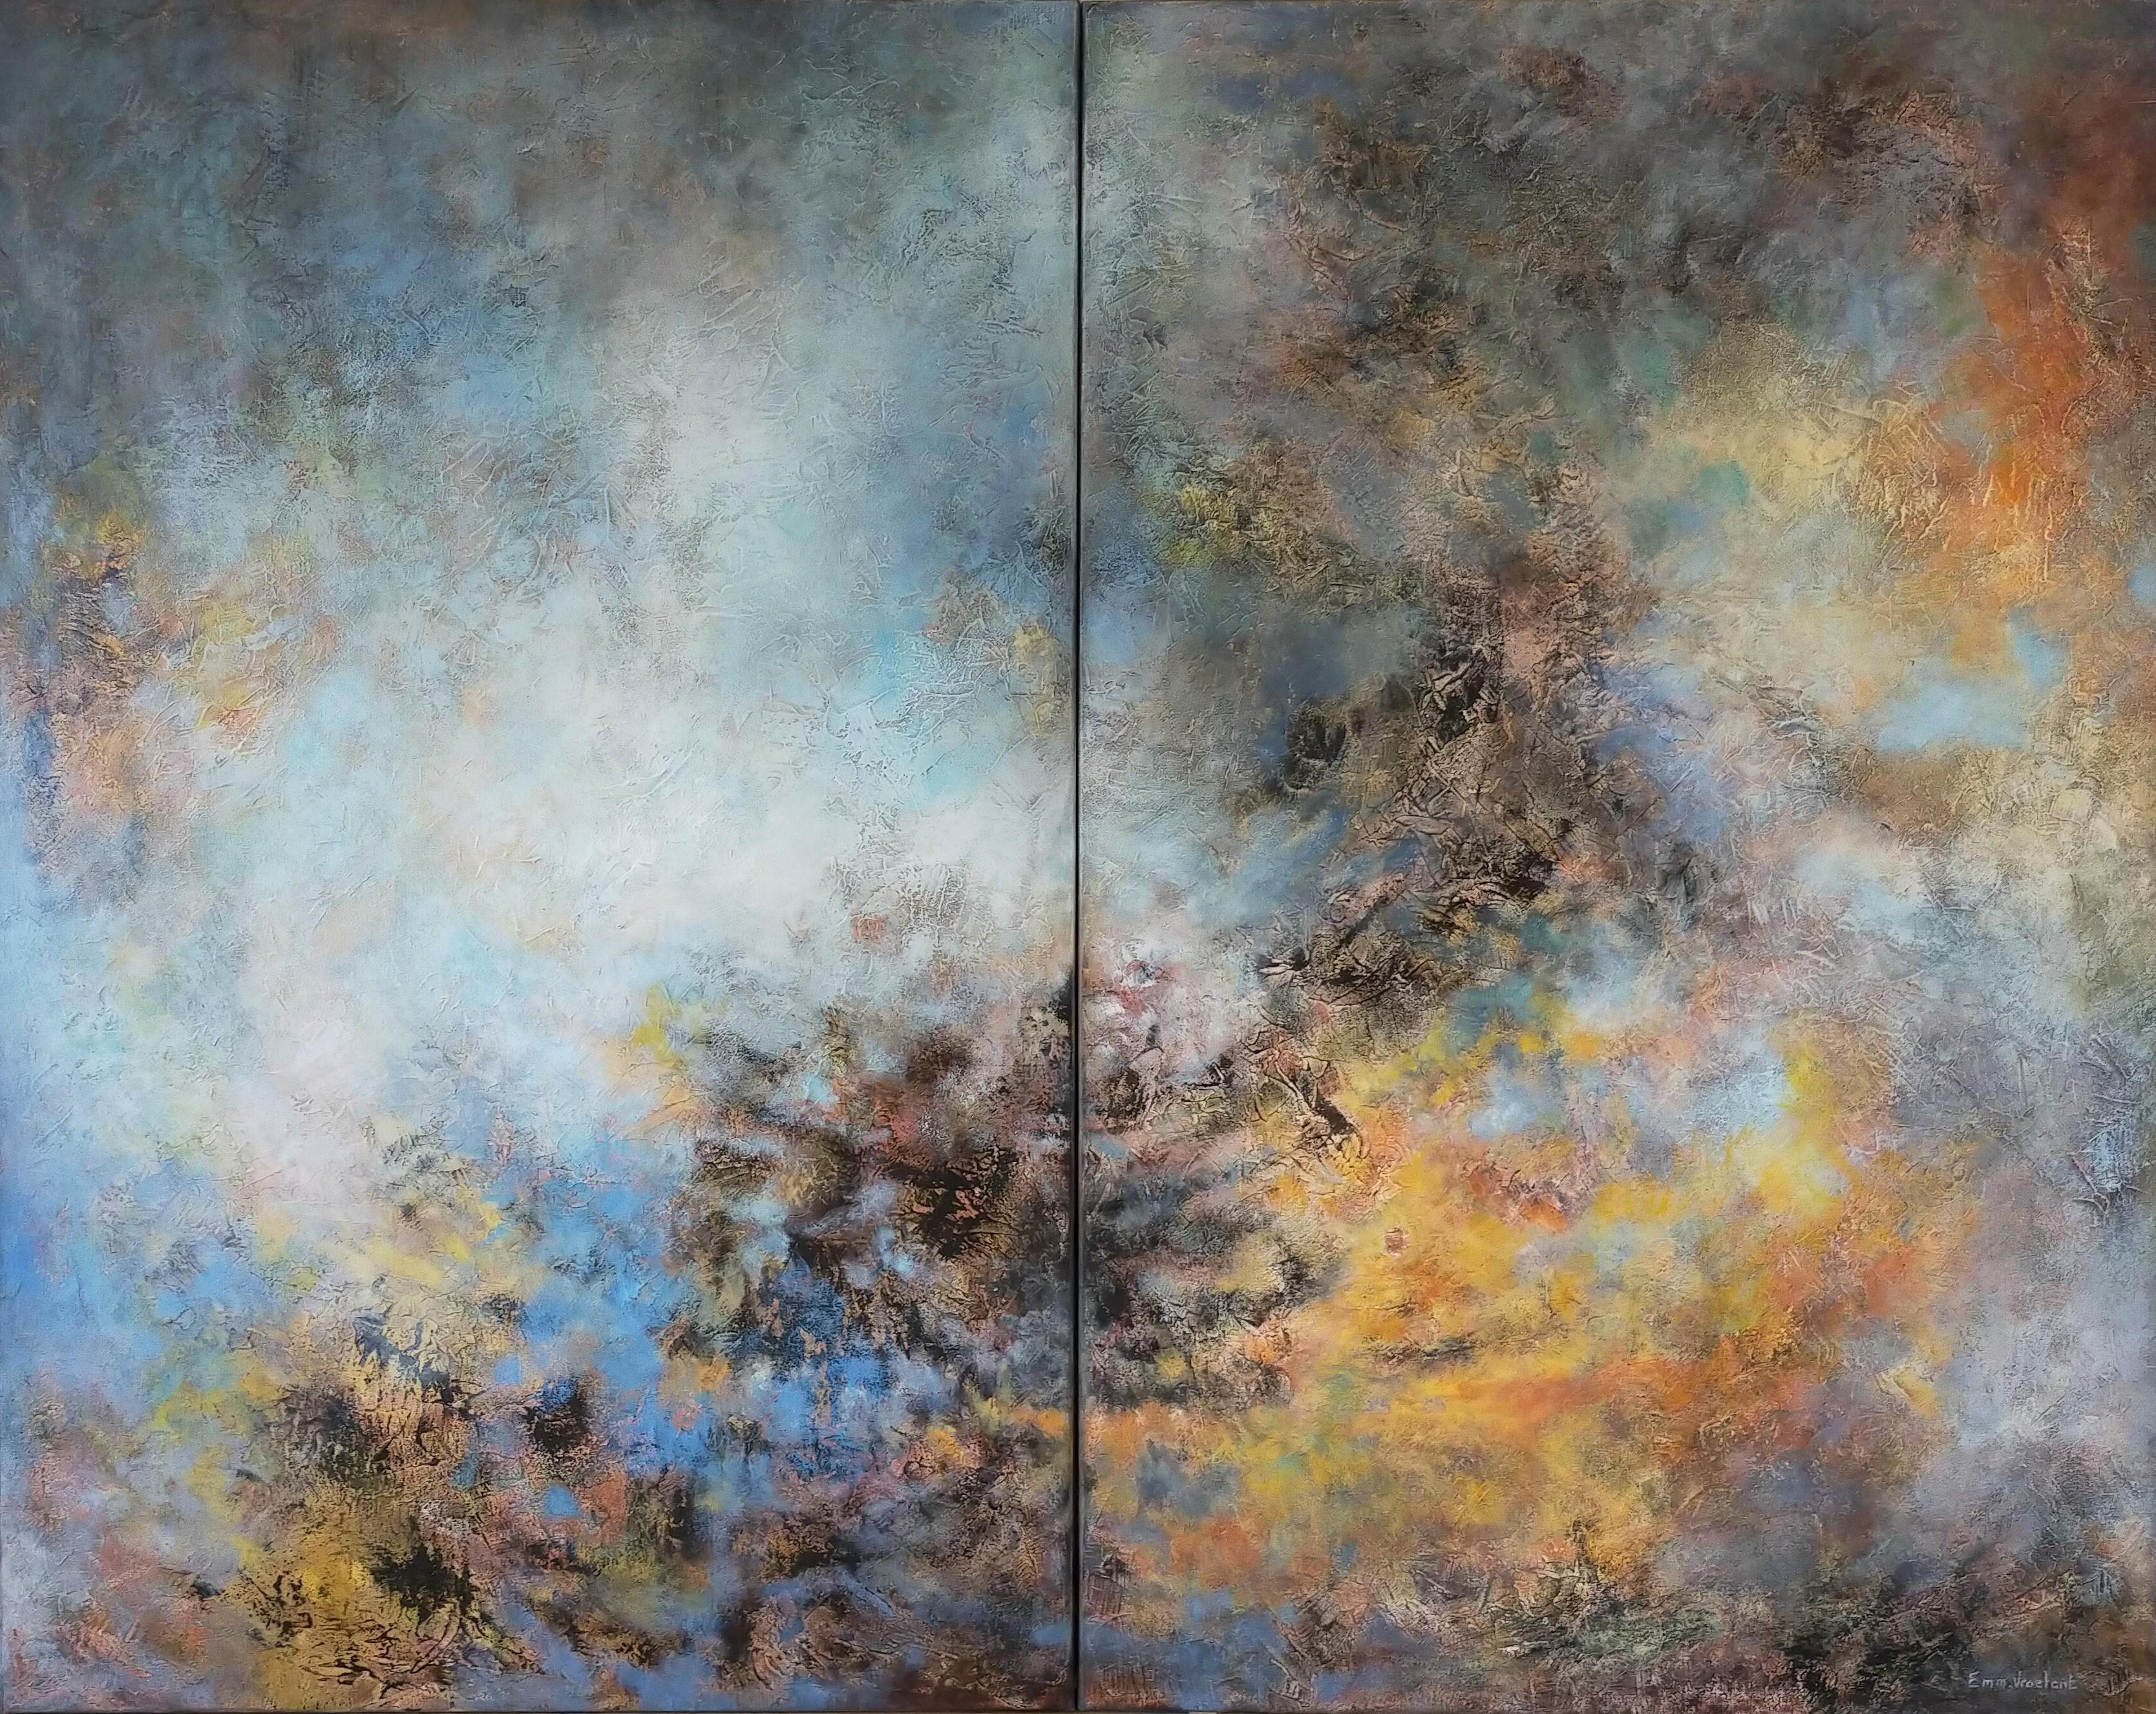 Emmanuelle Vroelant Interior Painting - abstract acrylic linen canvas 116x146 diptych "Heaven within" in wood crate